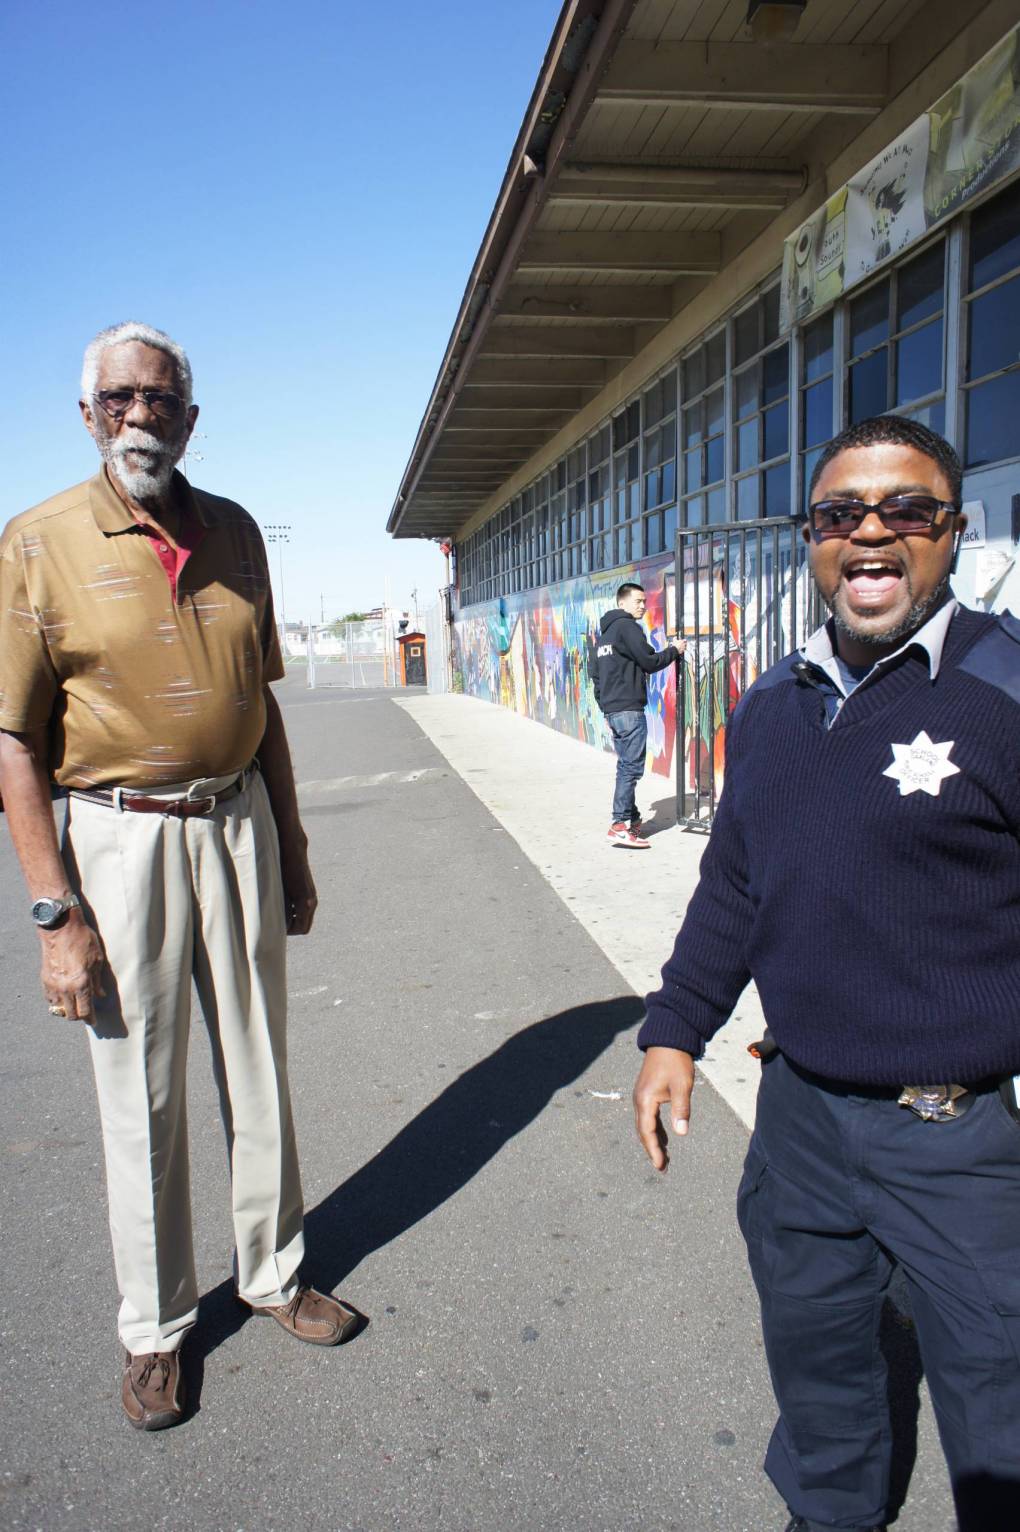 A school security guard and Mr. Bill Russell share a laugh.